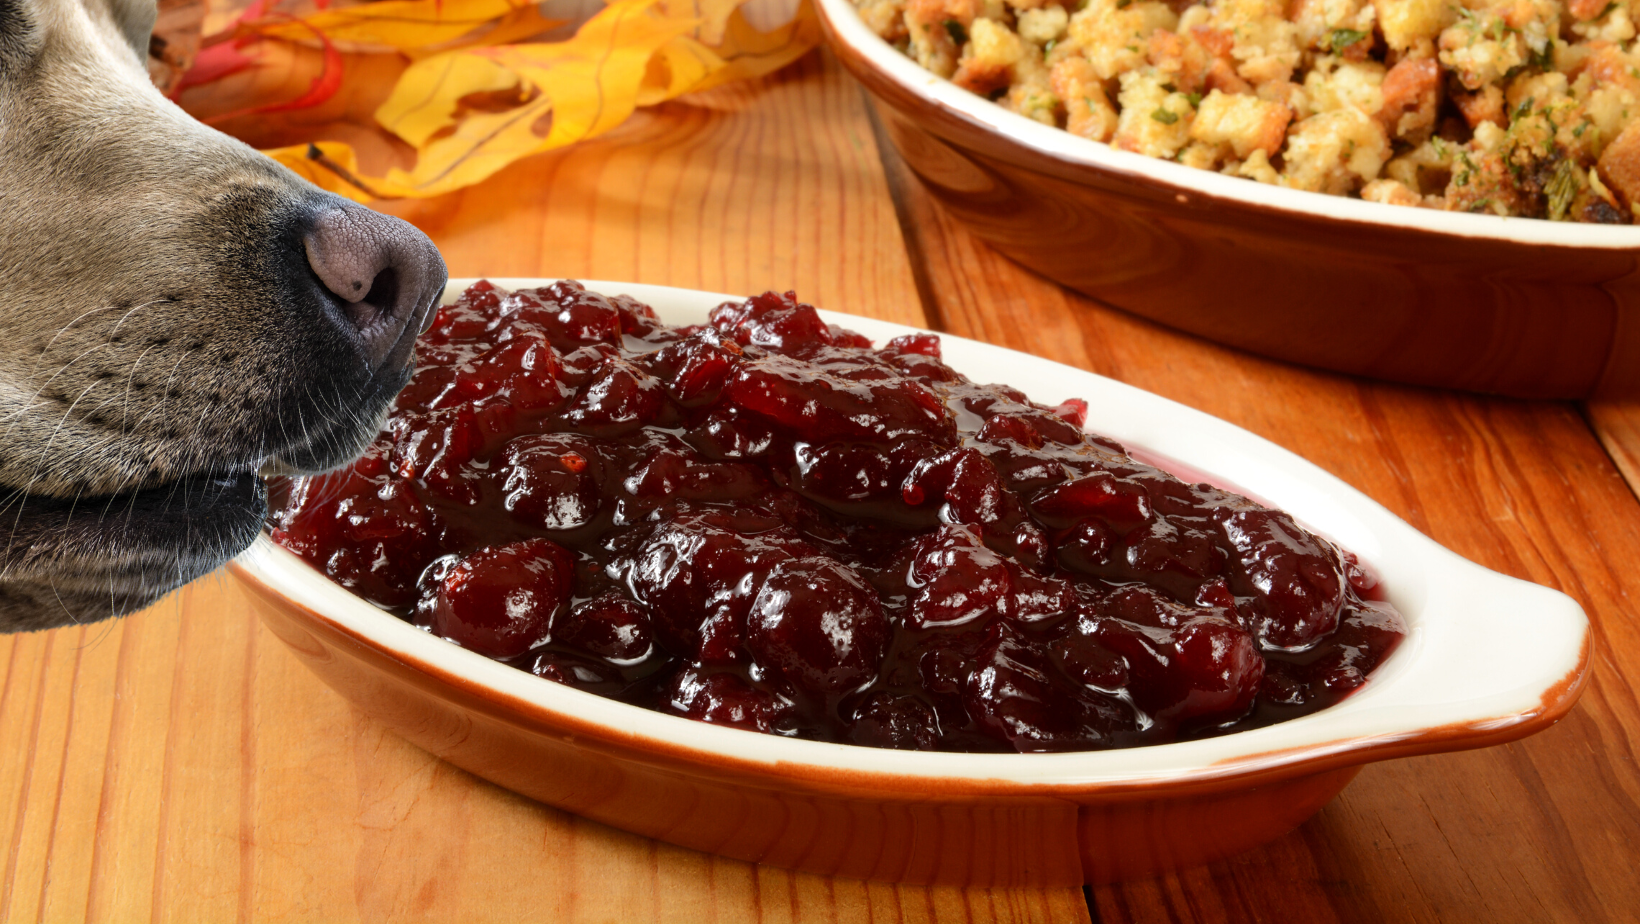 Can dogs have jellied cranberry sauce